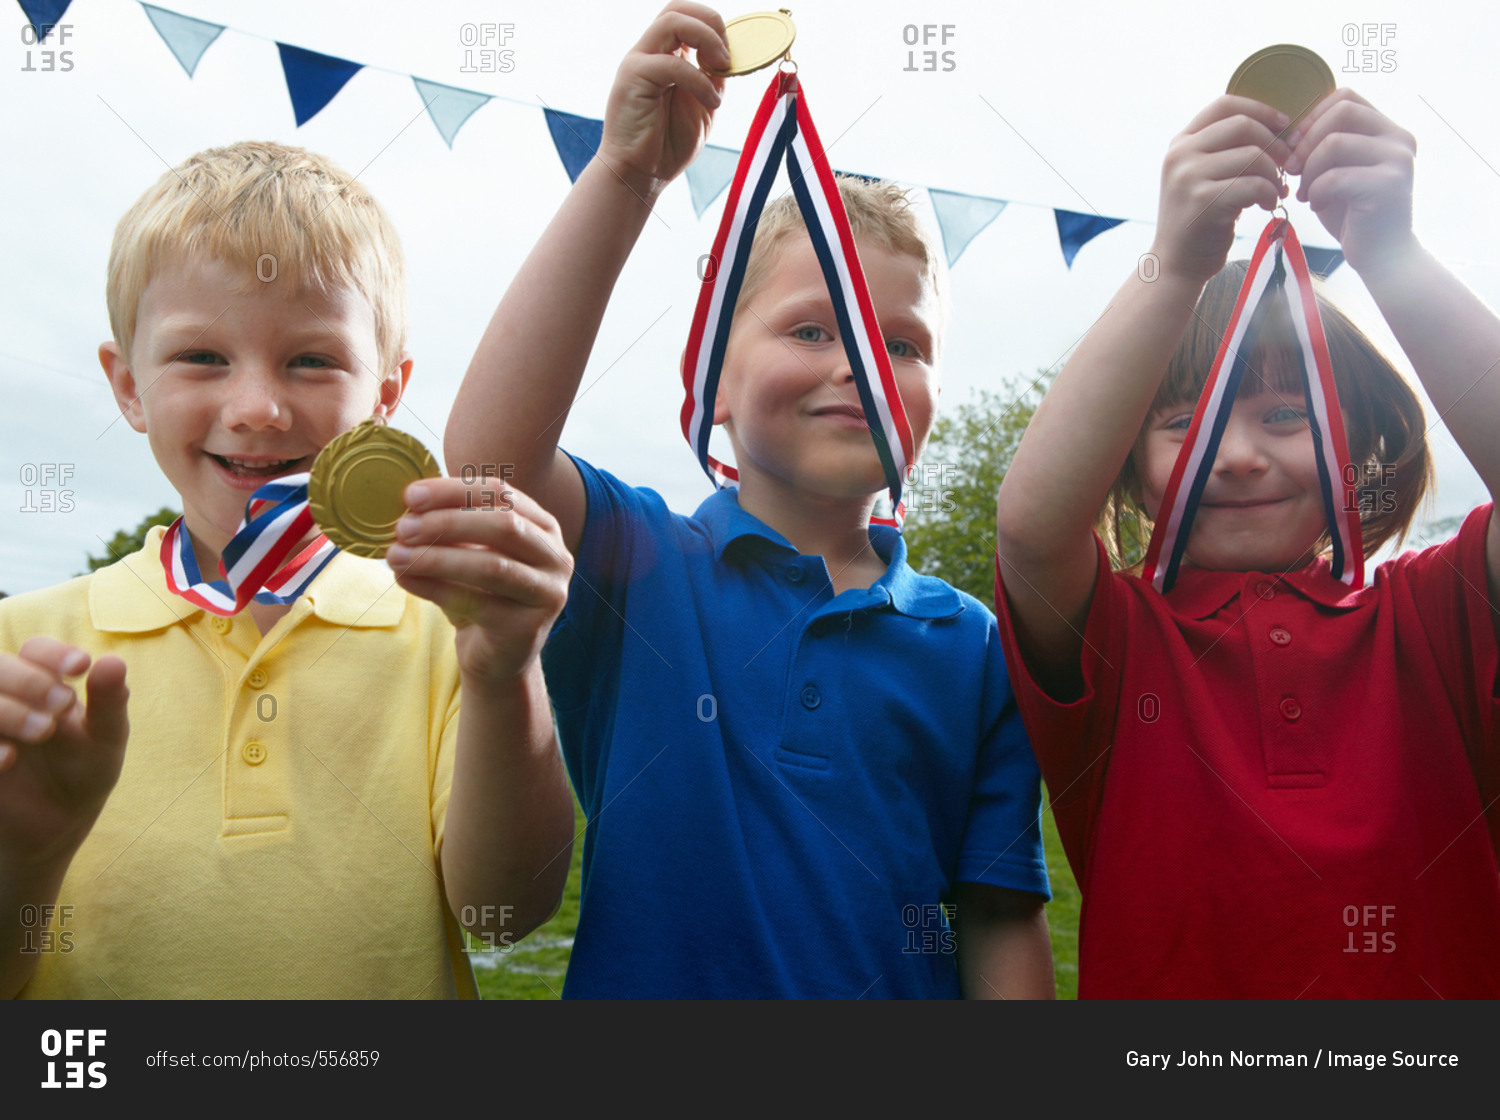 Three children holding sports medals on the school playing field